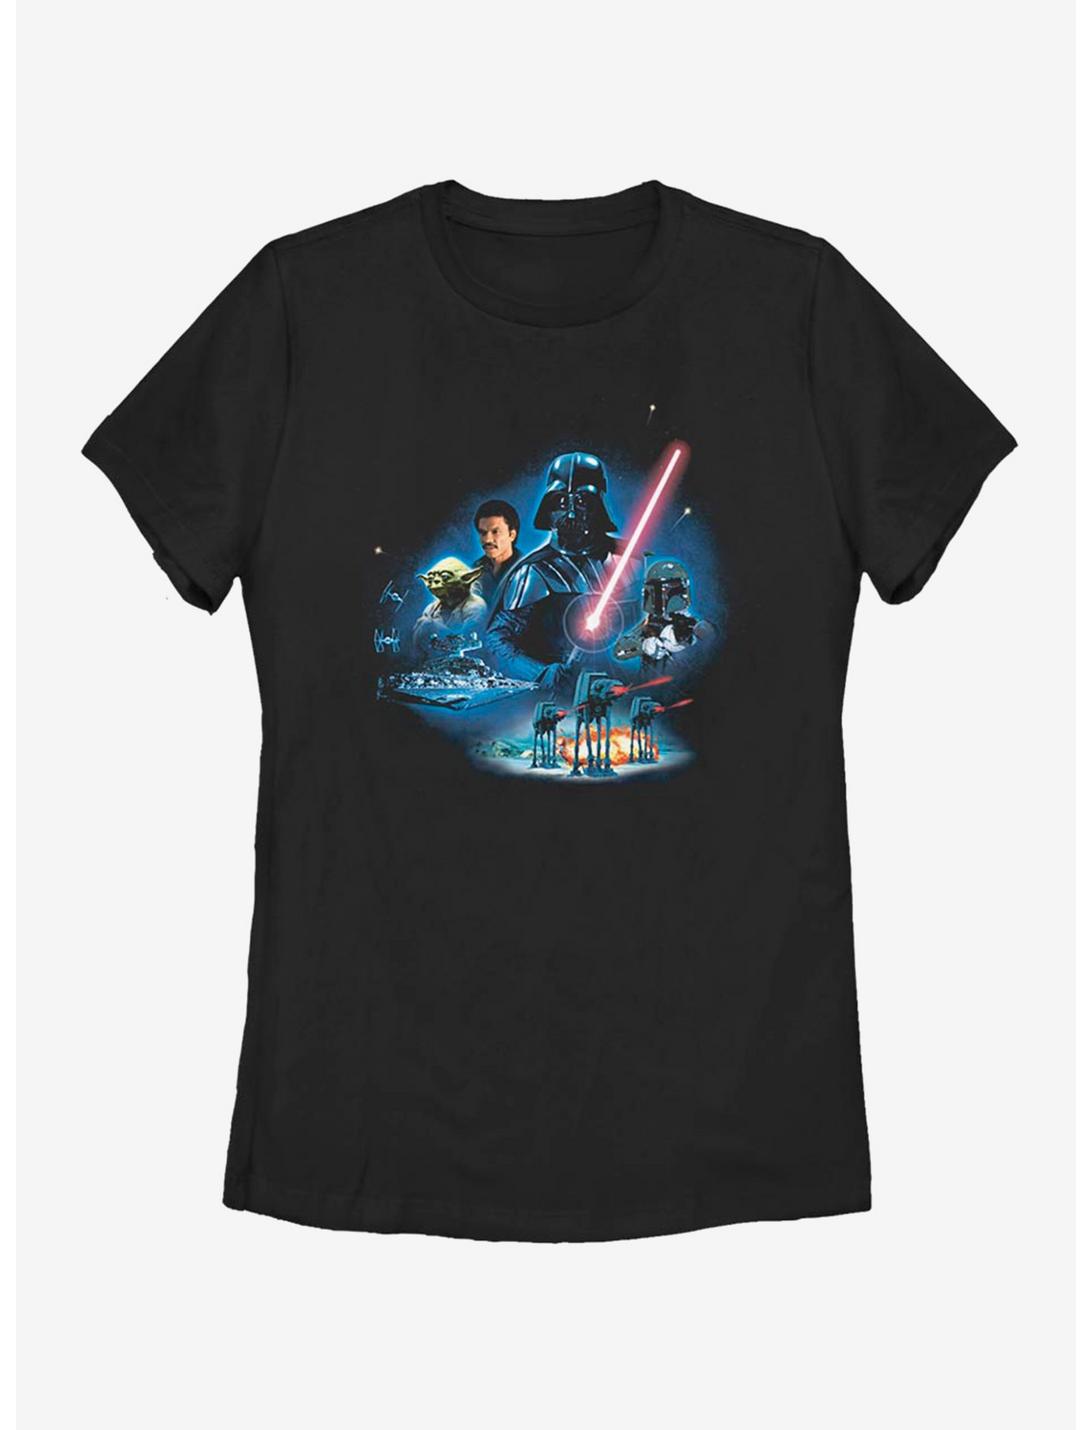 Star Wars Episode V The Empire Strikes Back Characters Womens T-Shirt, BLACK, hi-res